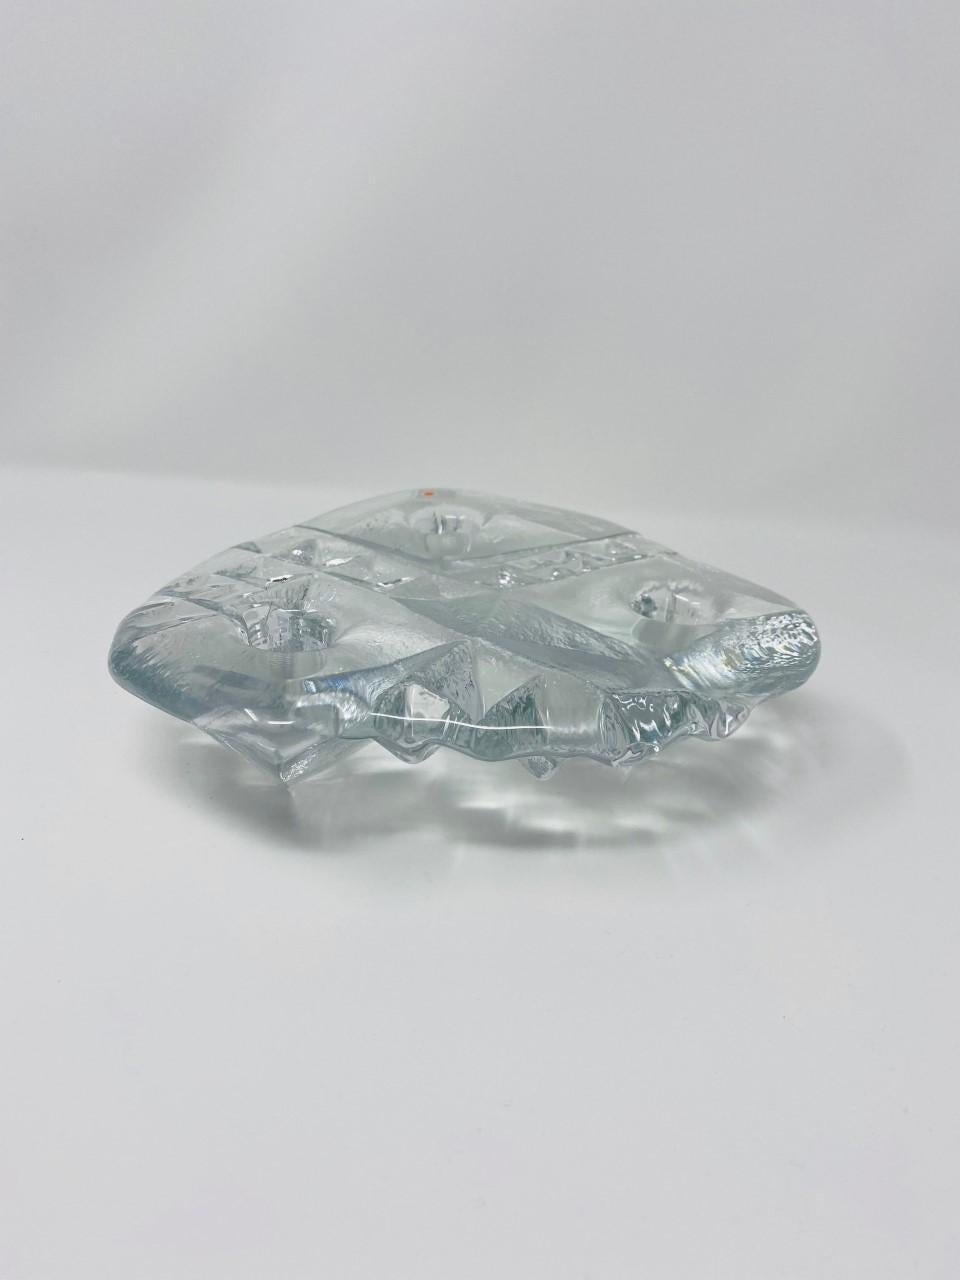 A Classic beautiful glass candleholder by Blenko. Diamond like and Alien like at the same time. This vintage design by the house of Blenko is truly modern and timeless. This candleholder is handmade and executed beautifully out of glass. The lines